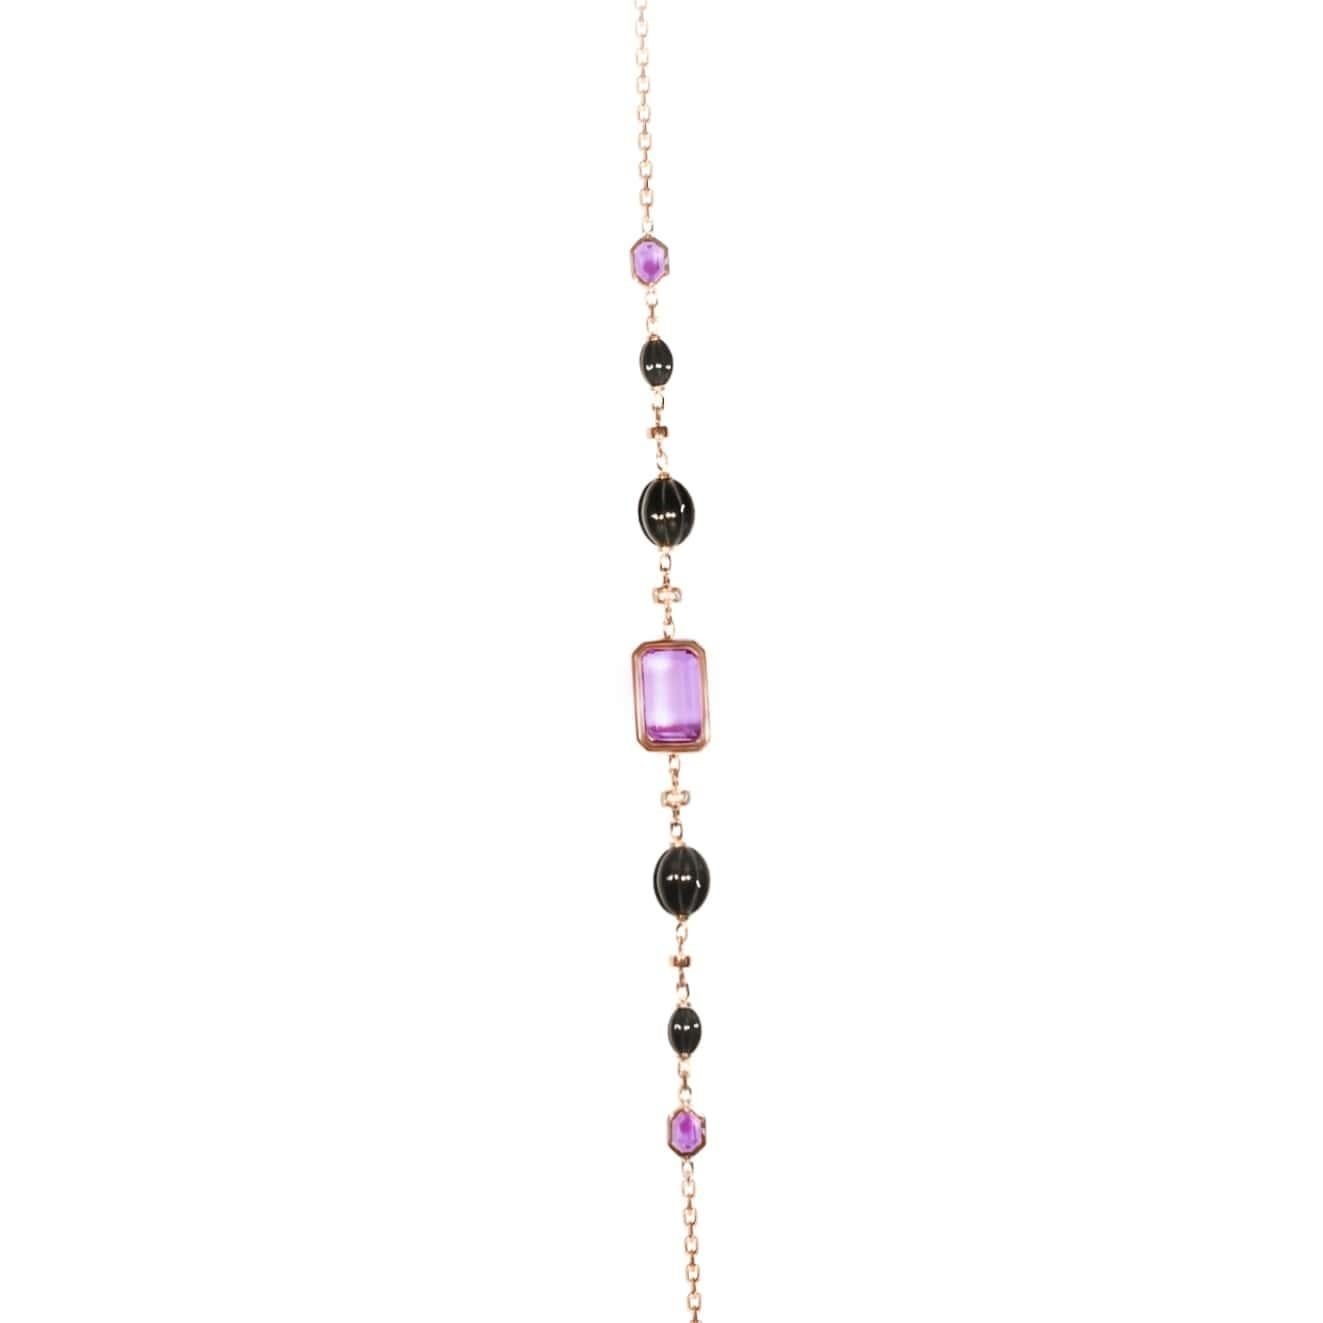 AMETHYST Black Jade Diamonds Pink in 18 Carat Rose Gold Long Necklace 120 cm (47.2 inches). HAND CARVED STONES made from a specific unique designed. HANDCRAFTED IN FRANCE.
The Designer, Bénédicte, decided to Produce all her Creations in her country